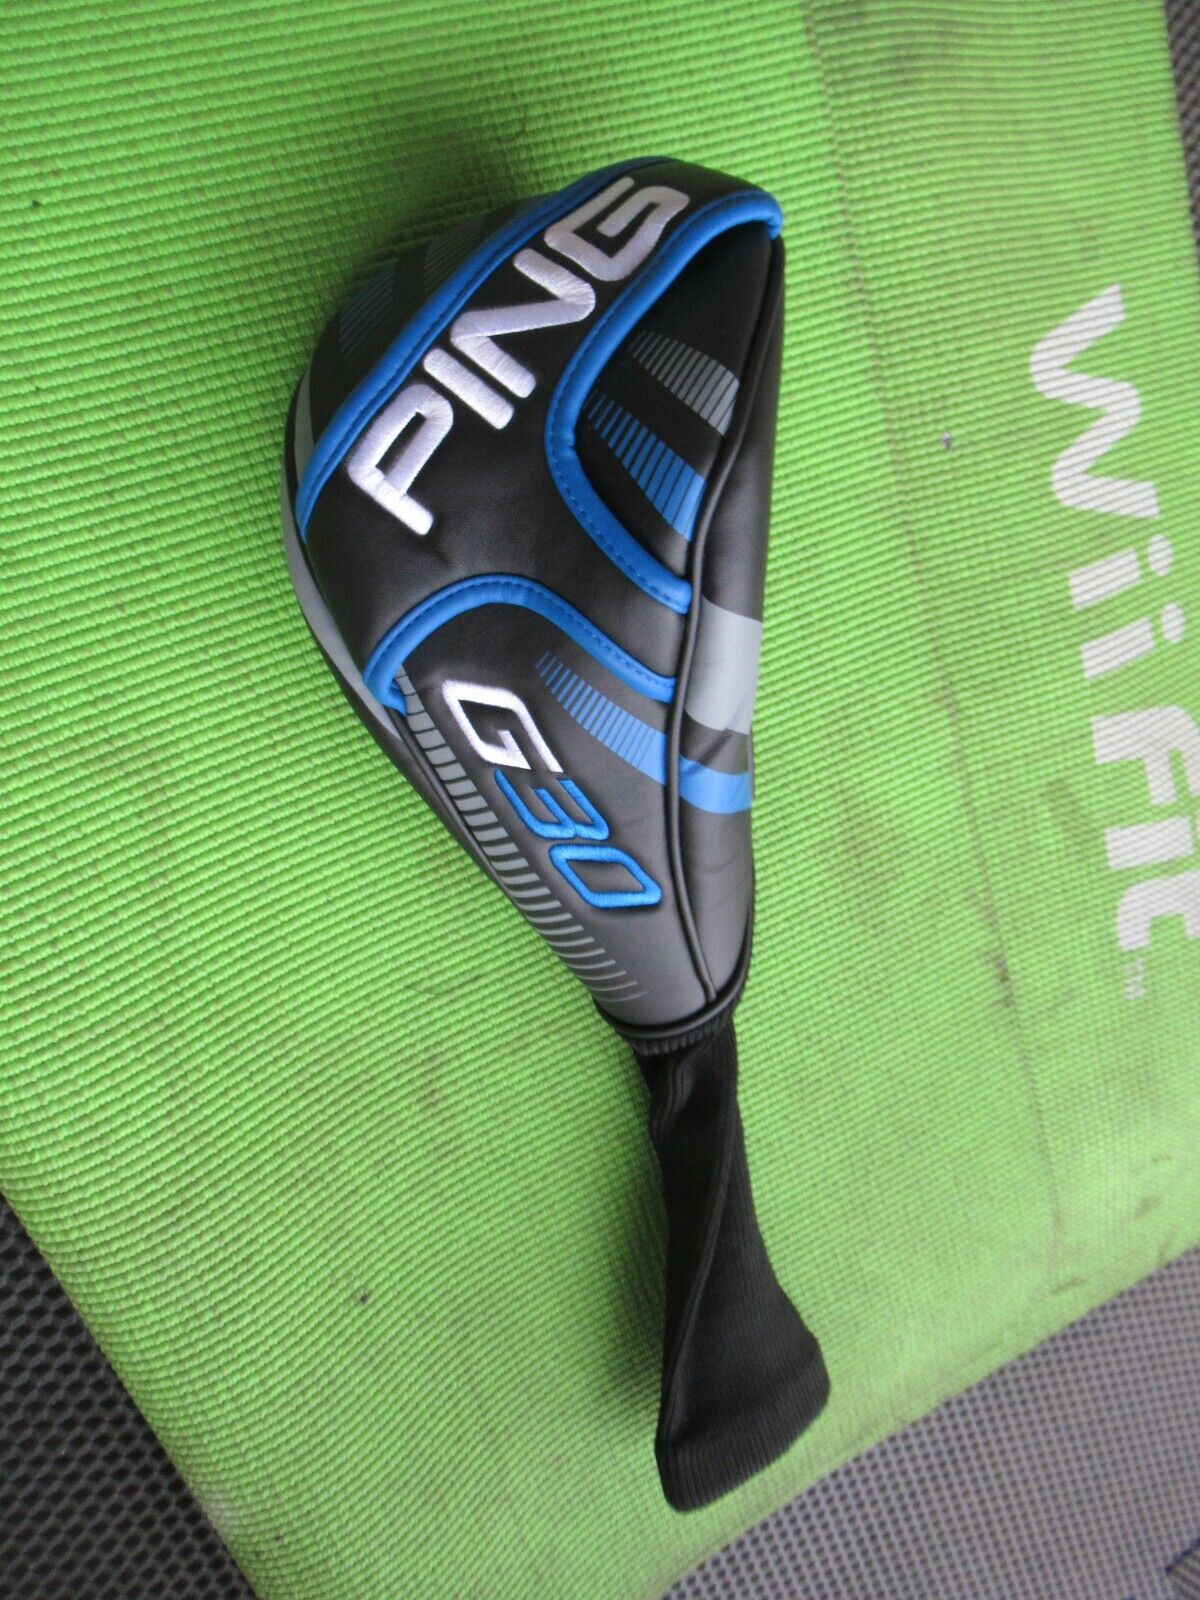 Ping G30 driver head-cover hc